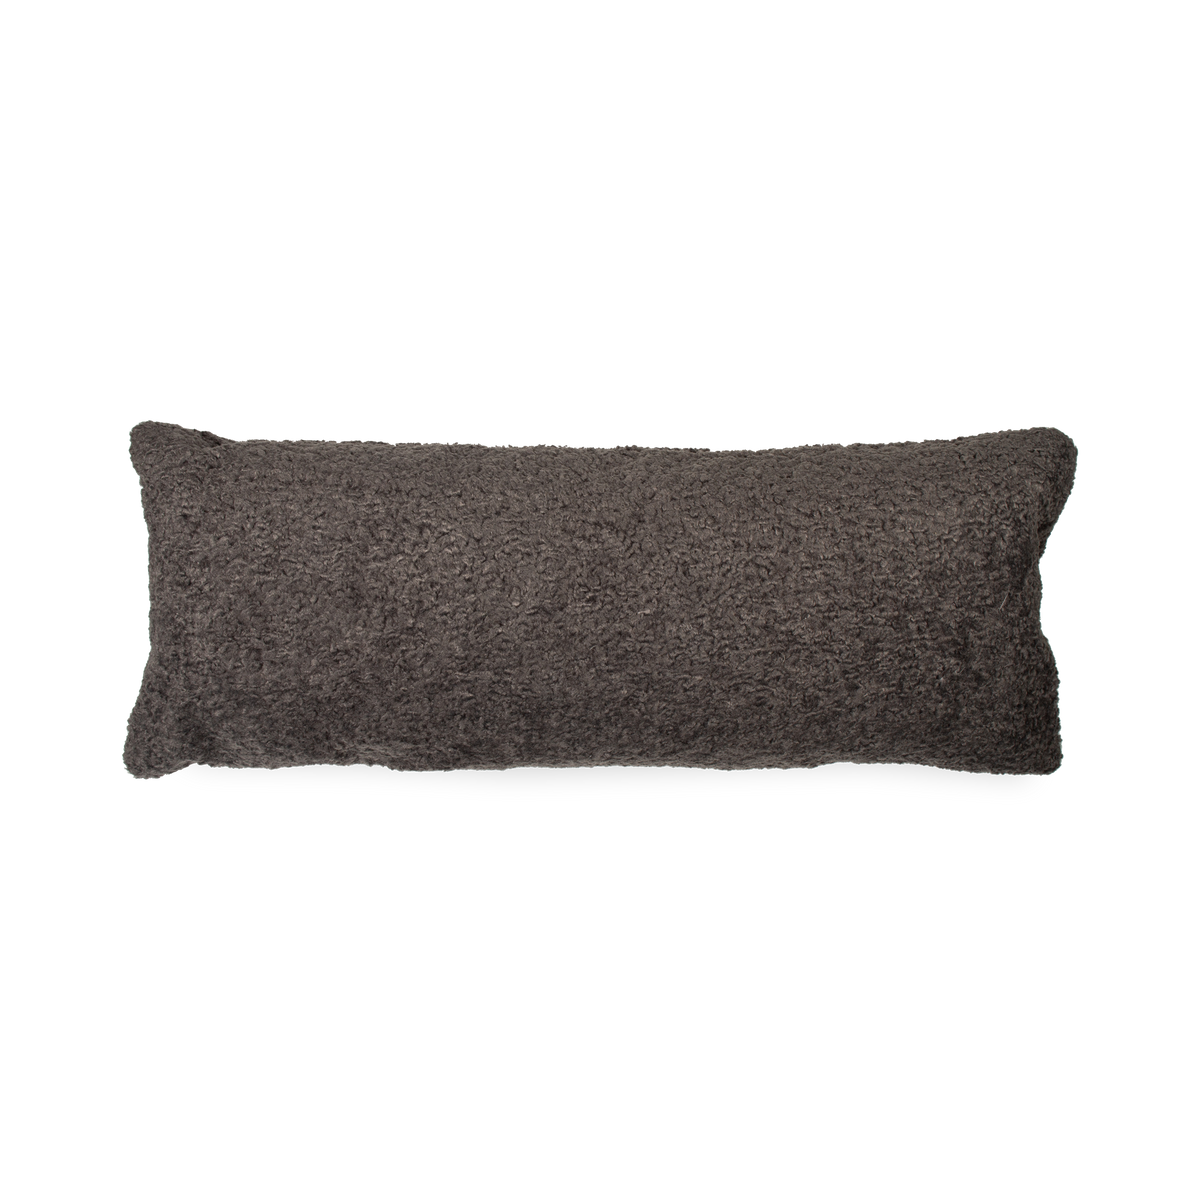 This Sheepskin Pillow features a textured exterior with soft sheepskin-like material.